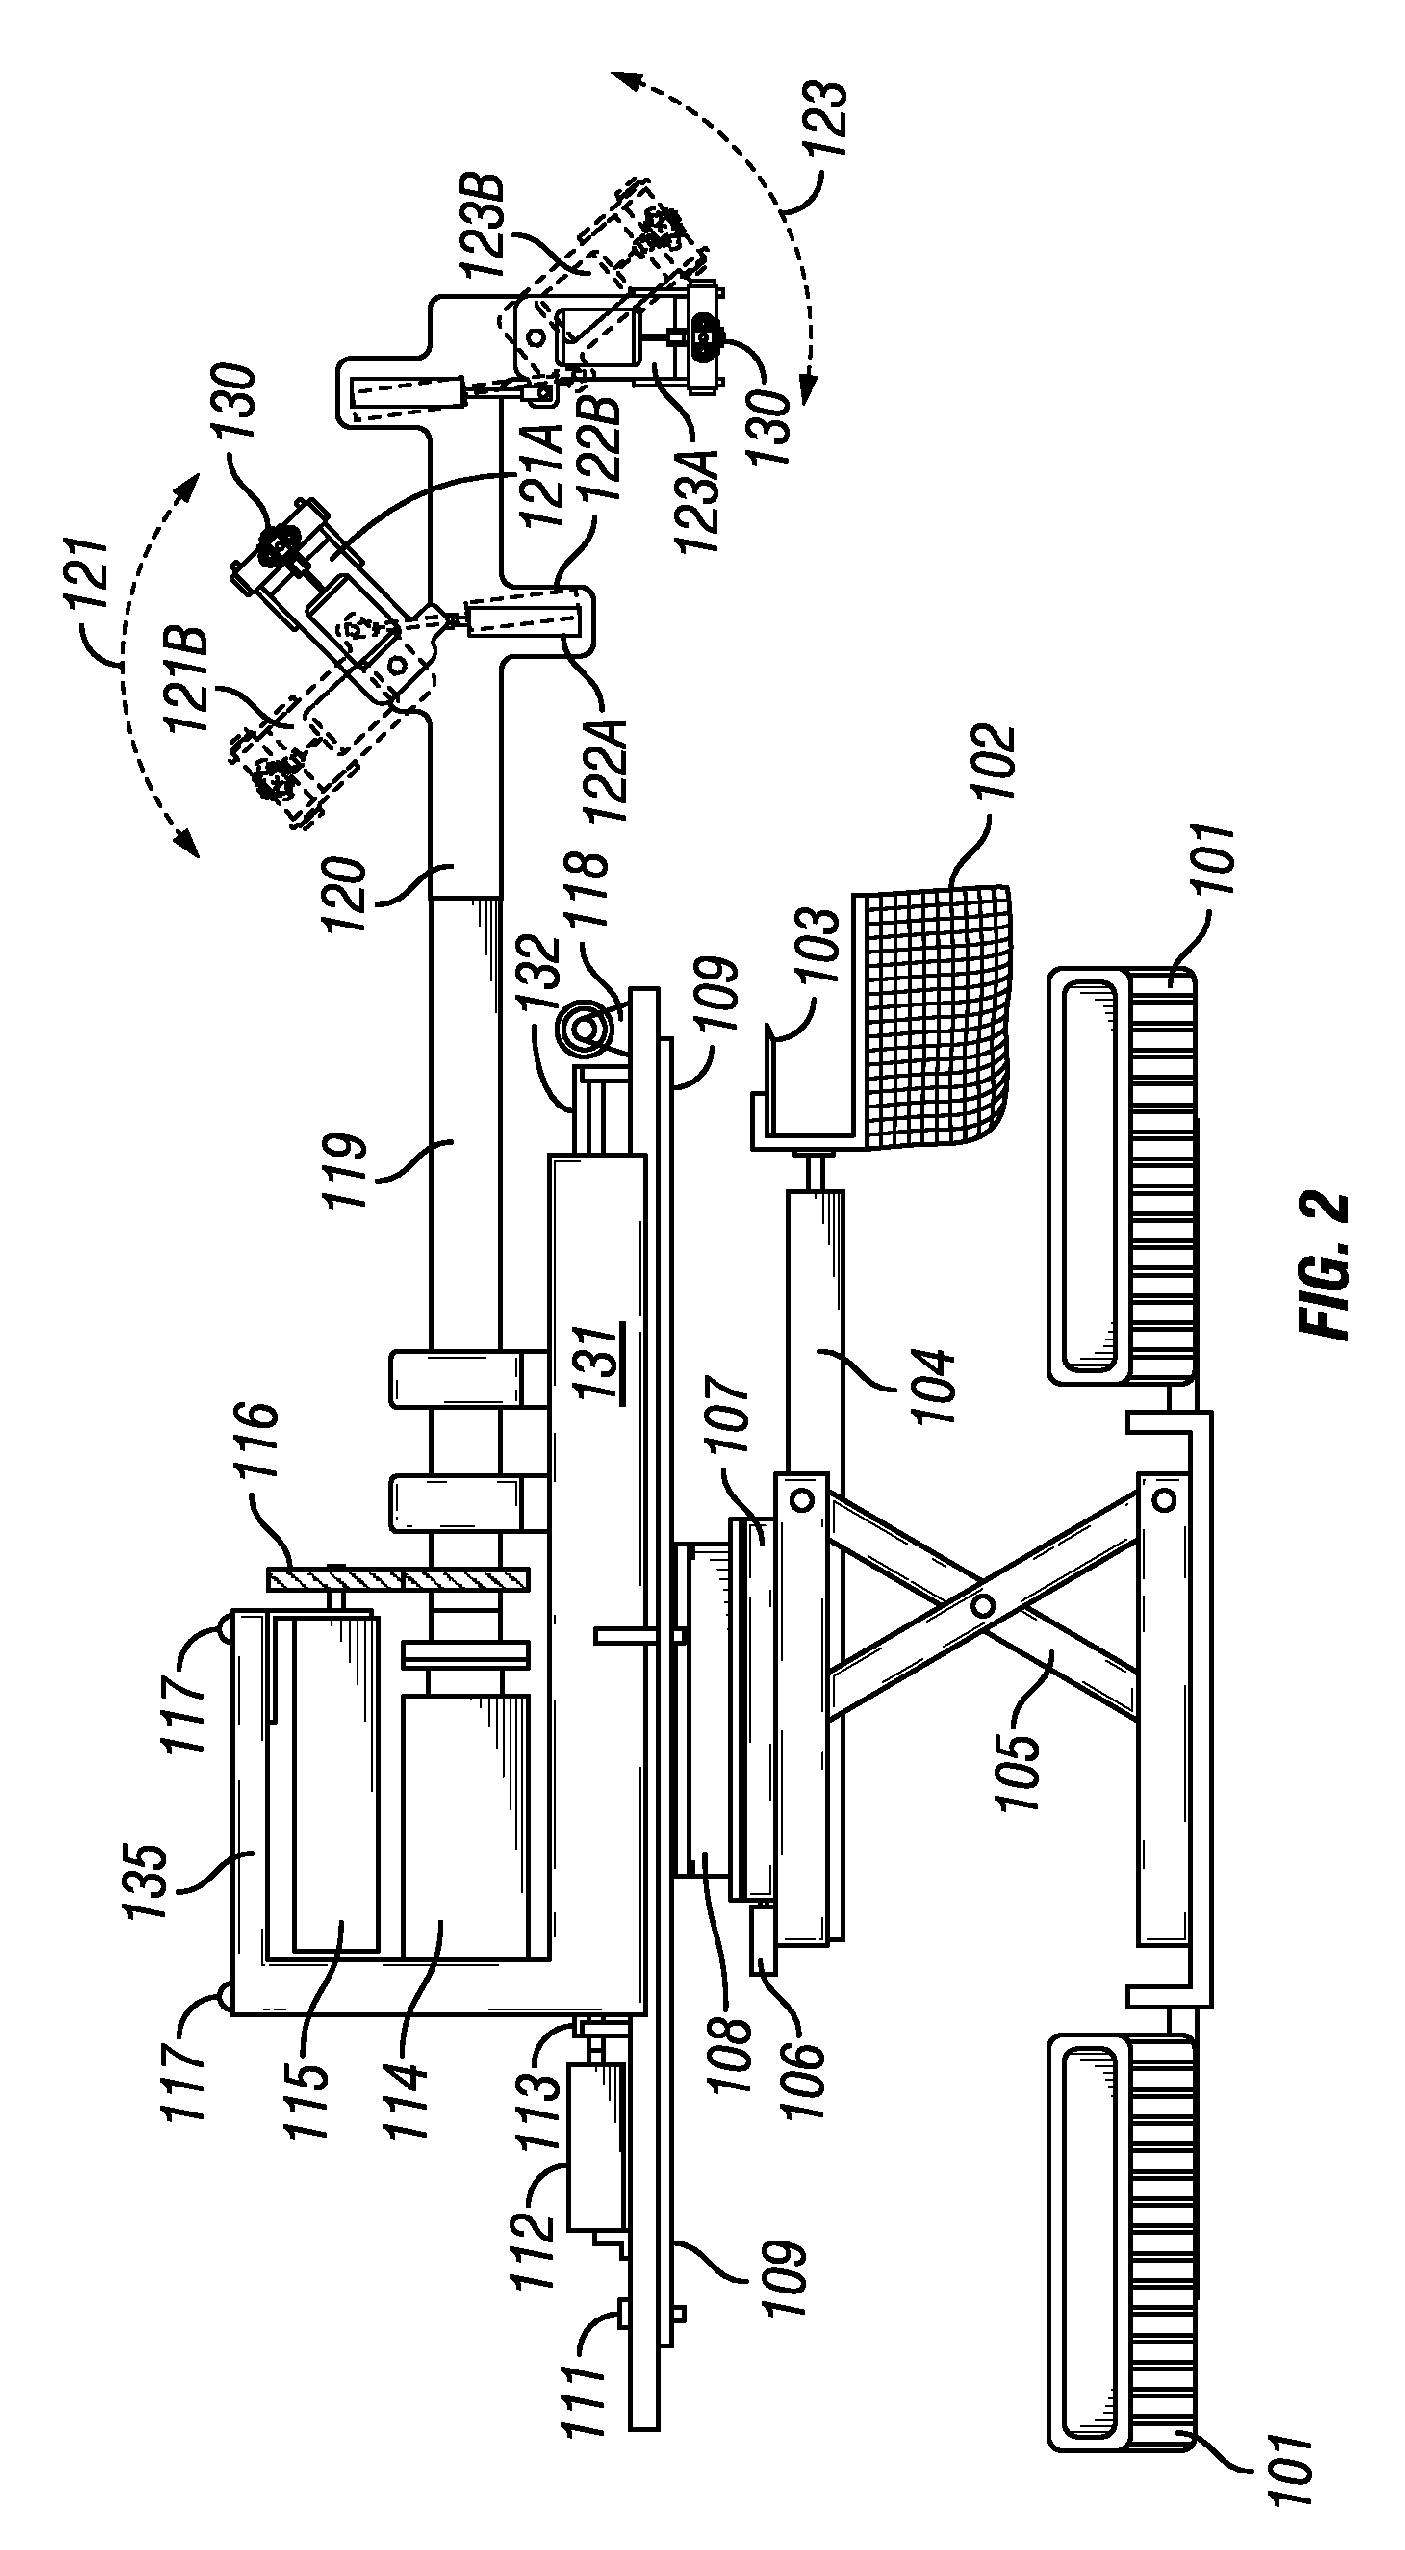 Apparatus and method for lining large diameter pipes with an environmentally compatible impervious membrane